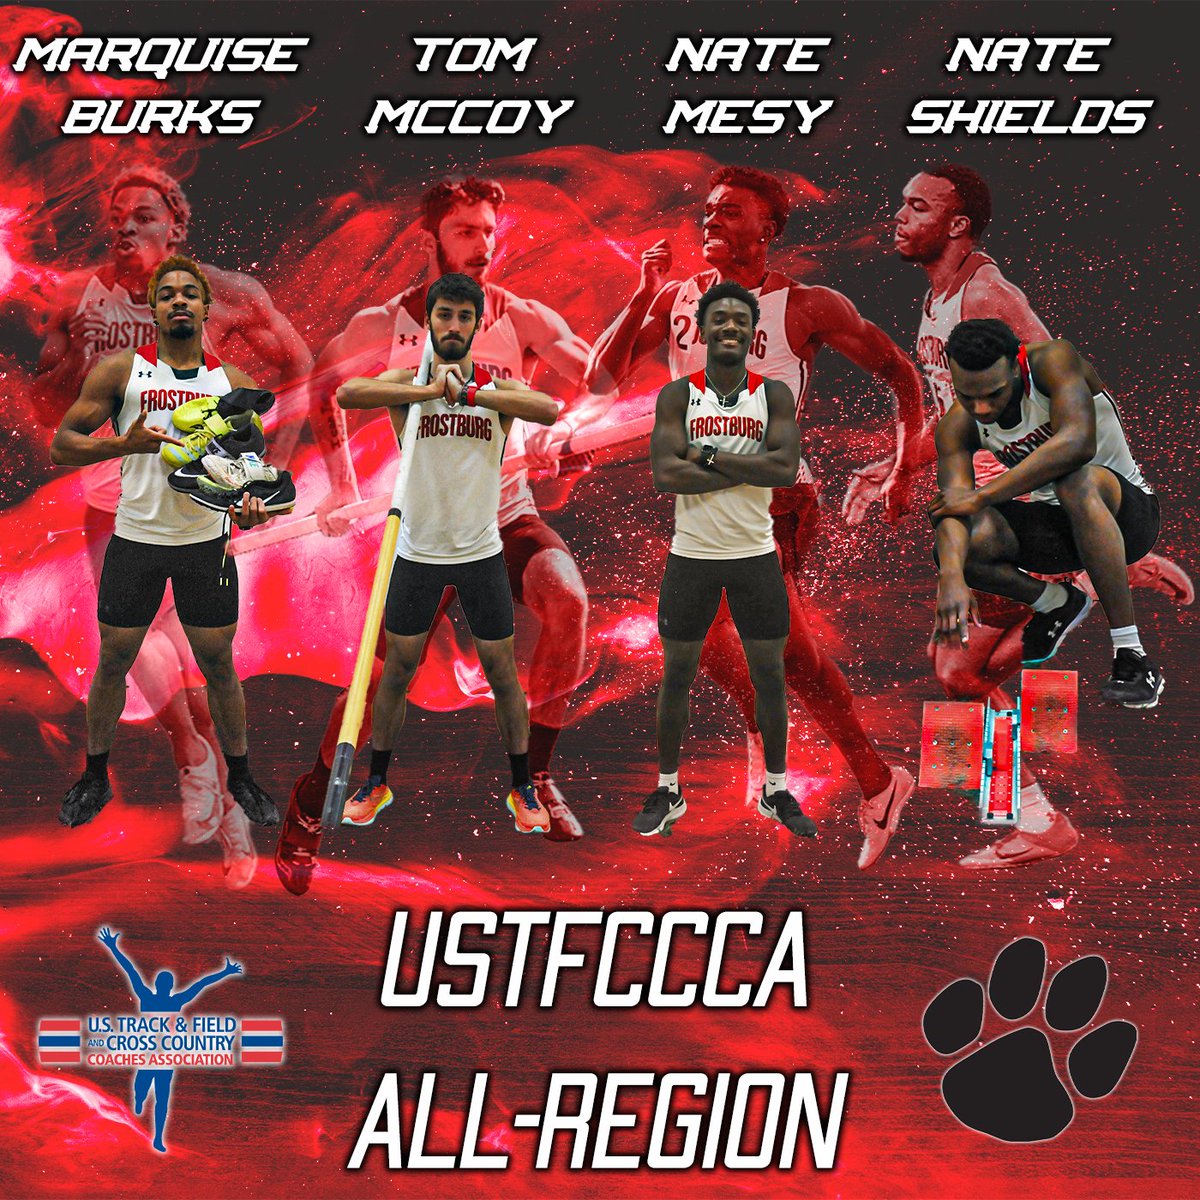 Congrats to our 4 @FrostburgXCTF athletes on earning All-Region honors for the outdoor season! #BobcatPride